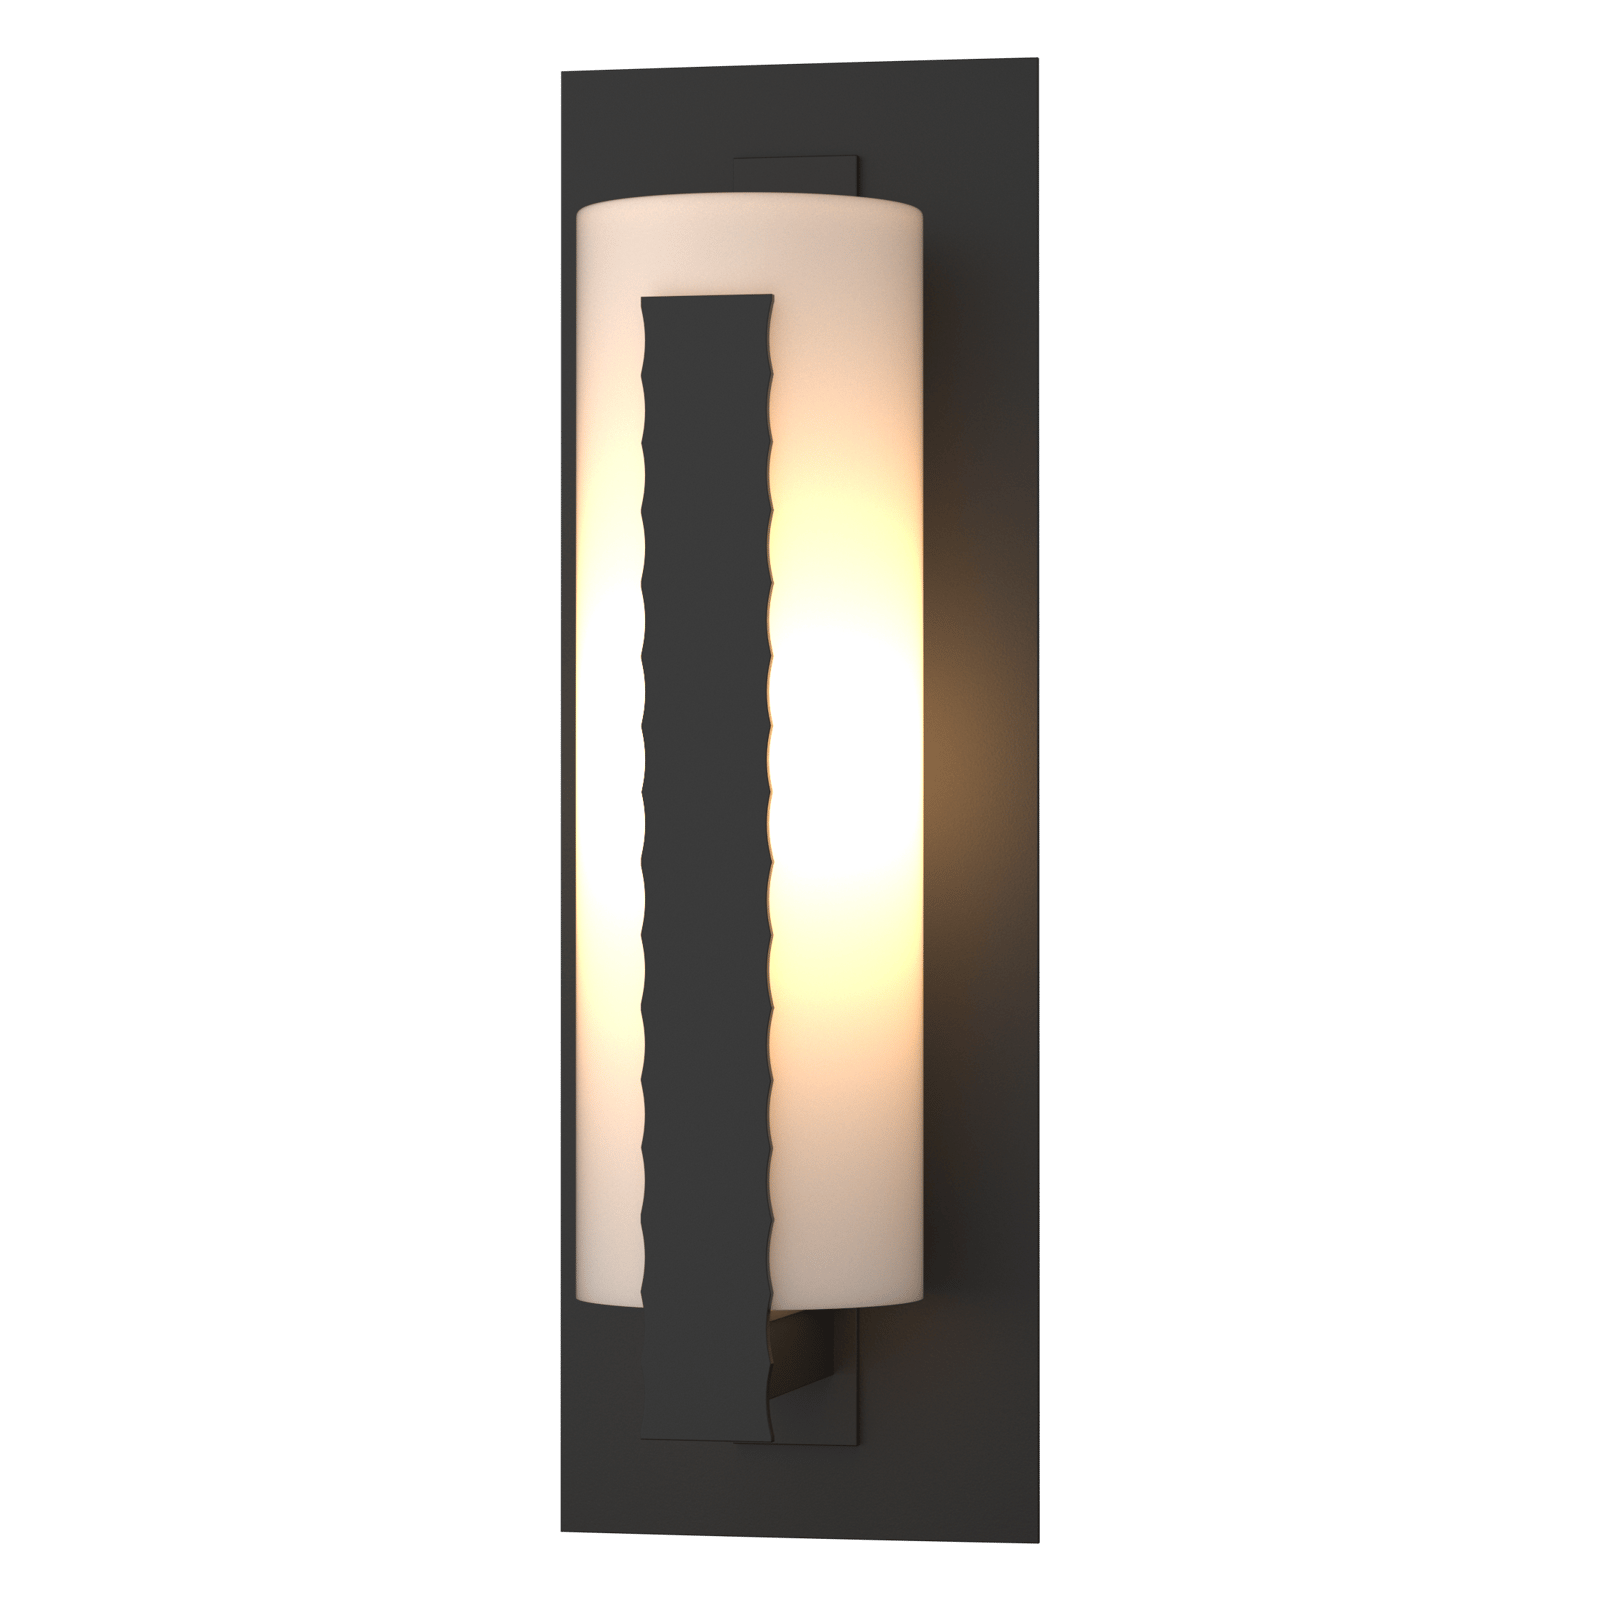 Hubbardton Forge Forged Vertical Bars Large Outdoor Sconce Outdoor l Wall Hubbardton Forge Coastal Black Opal Glass (GG) 